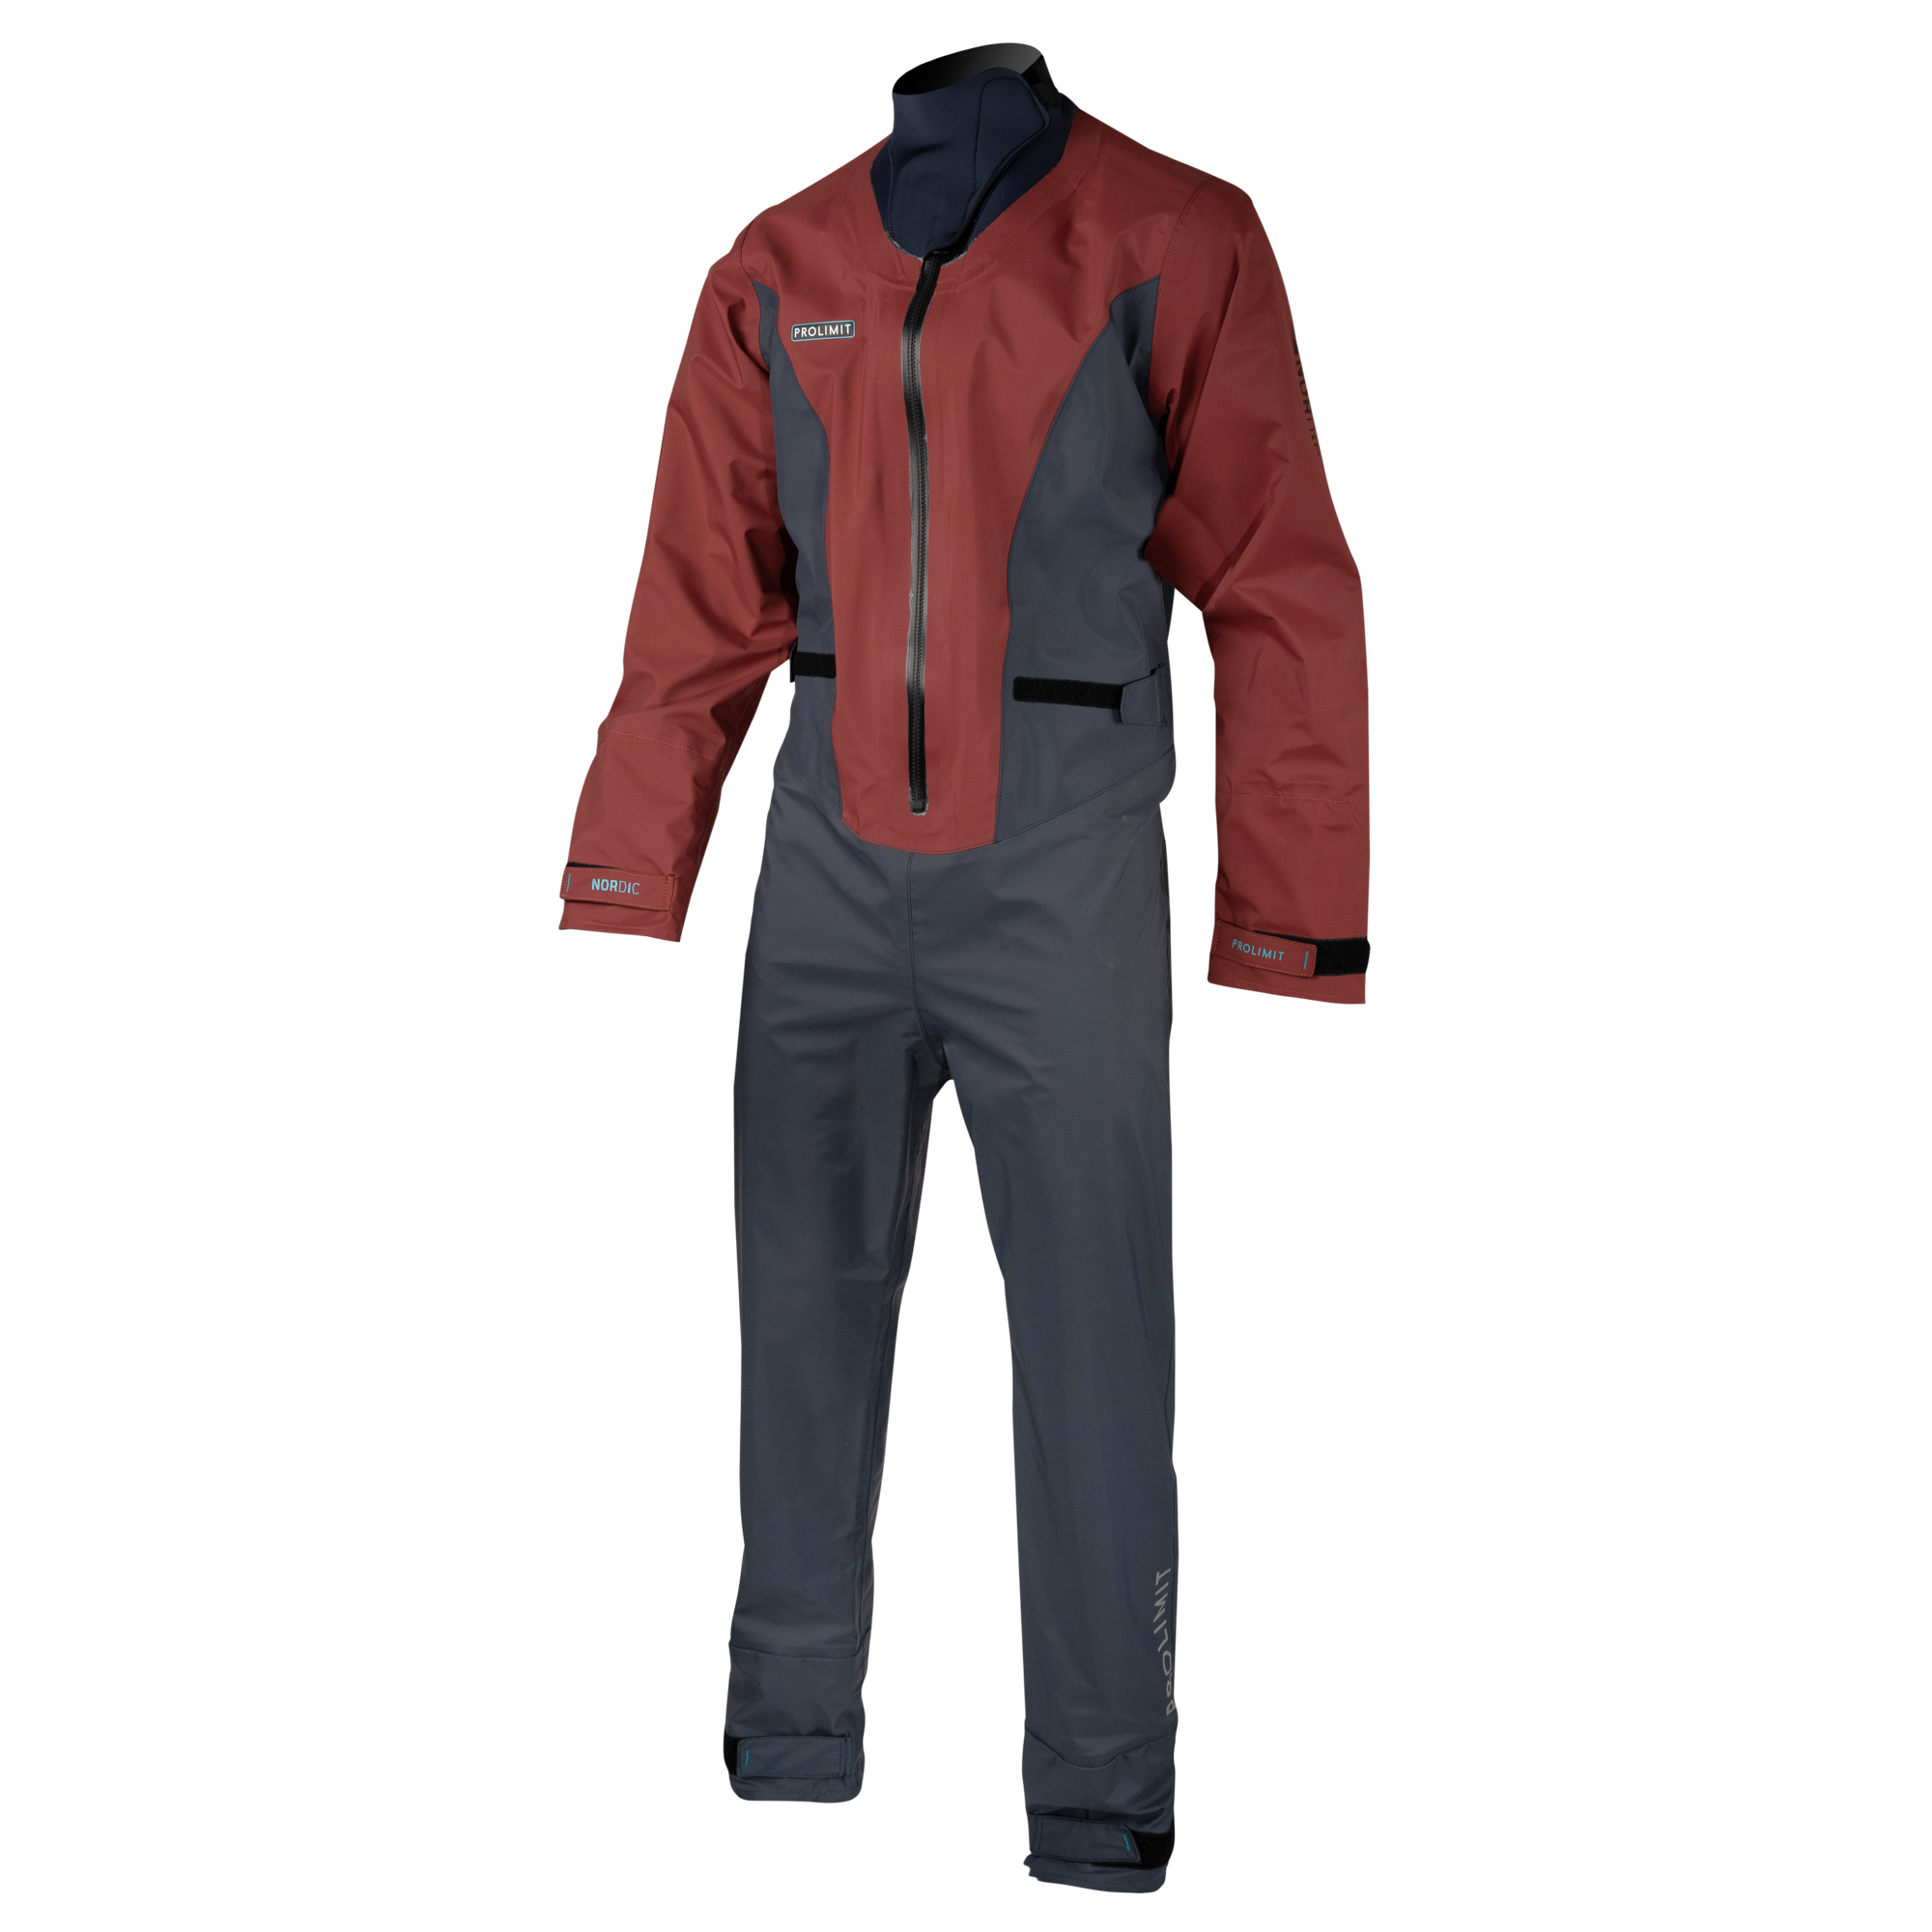 Nordic SUP suit neo stretchpanel